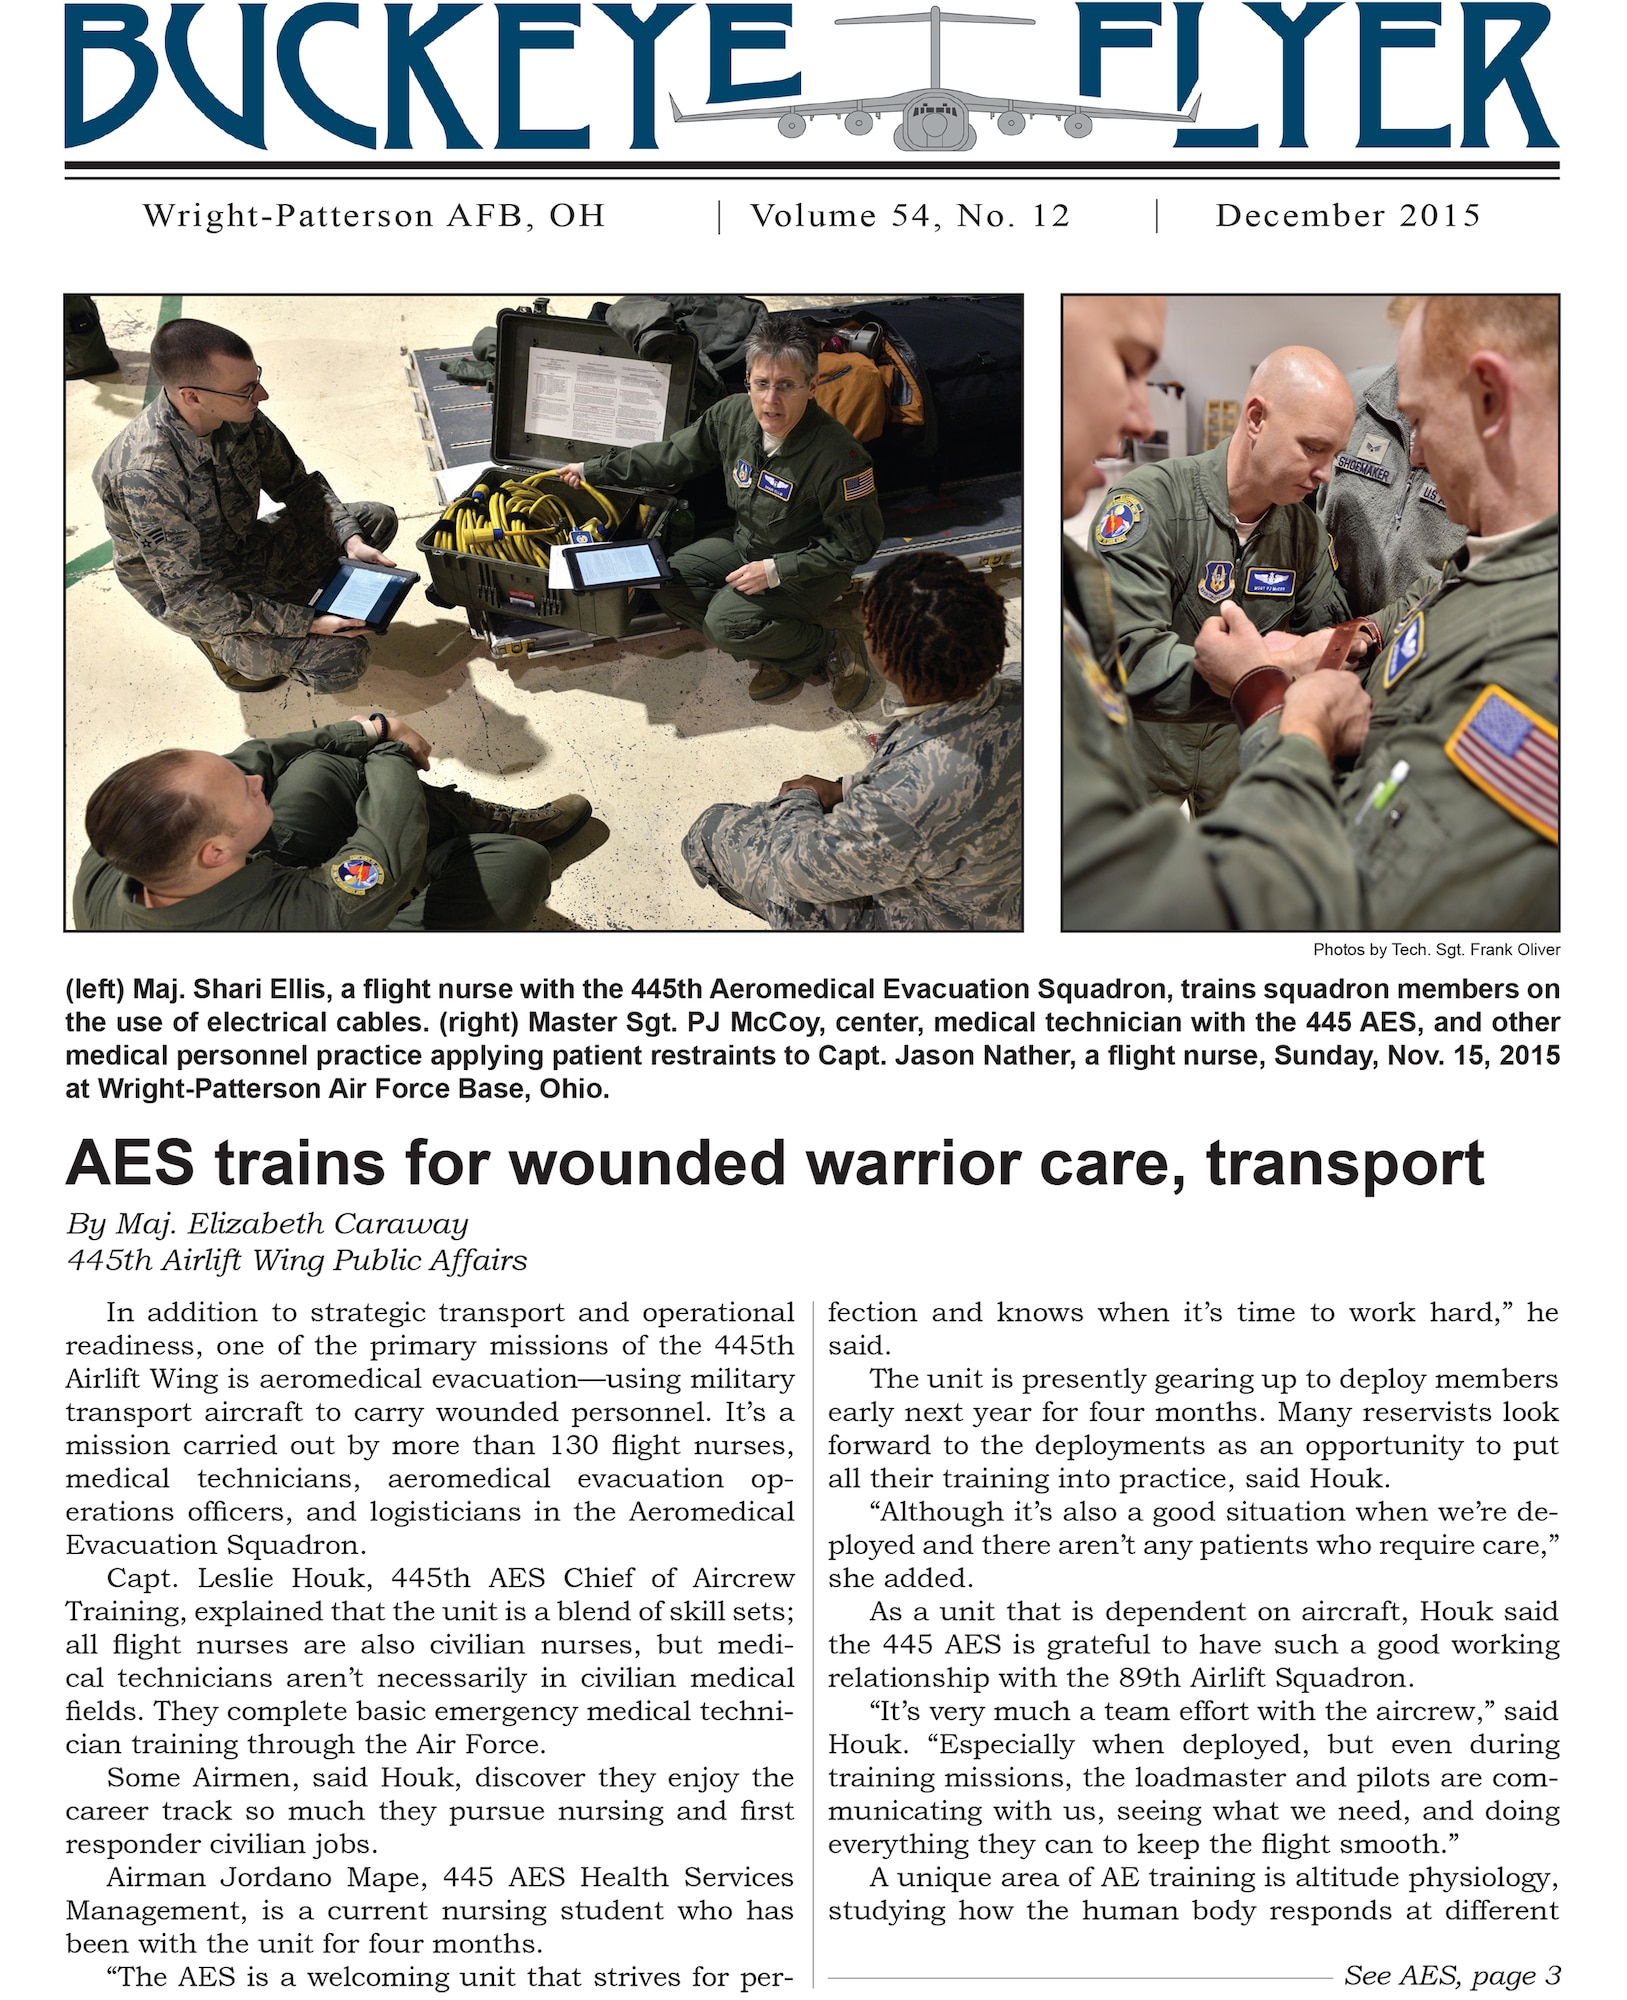 WRIGHT-PATTERSON AIR FORCE BASE, Ohio - The Buckeye Flyer is the official publication of the 445th Airlift Wing and includes eight pages of stories, photos and features. (U.S. Air Force photo)